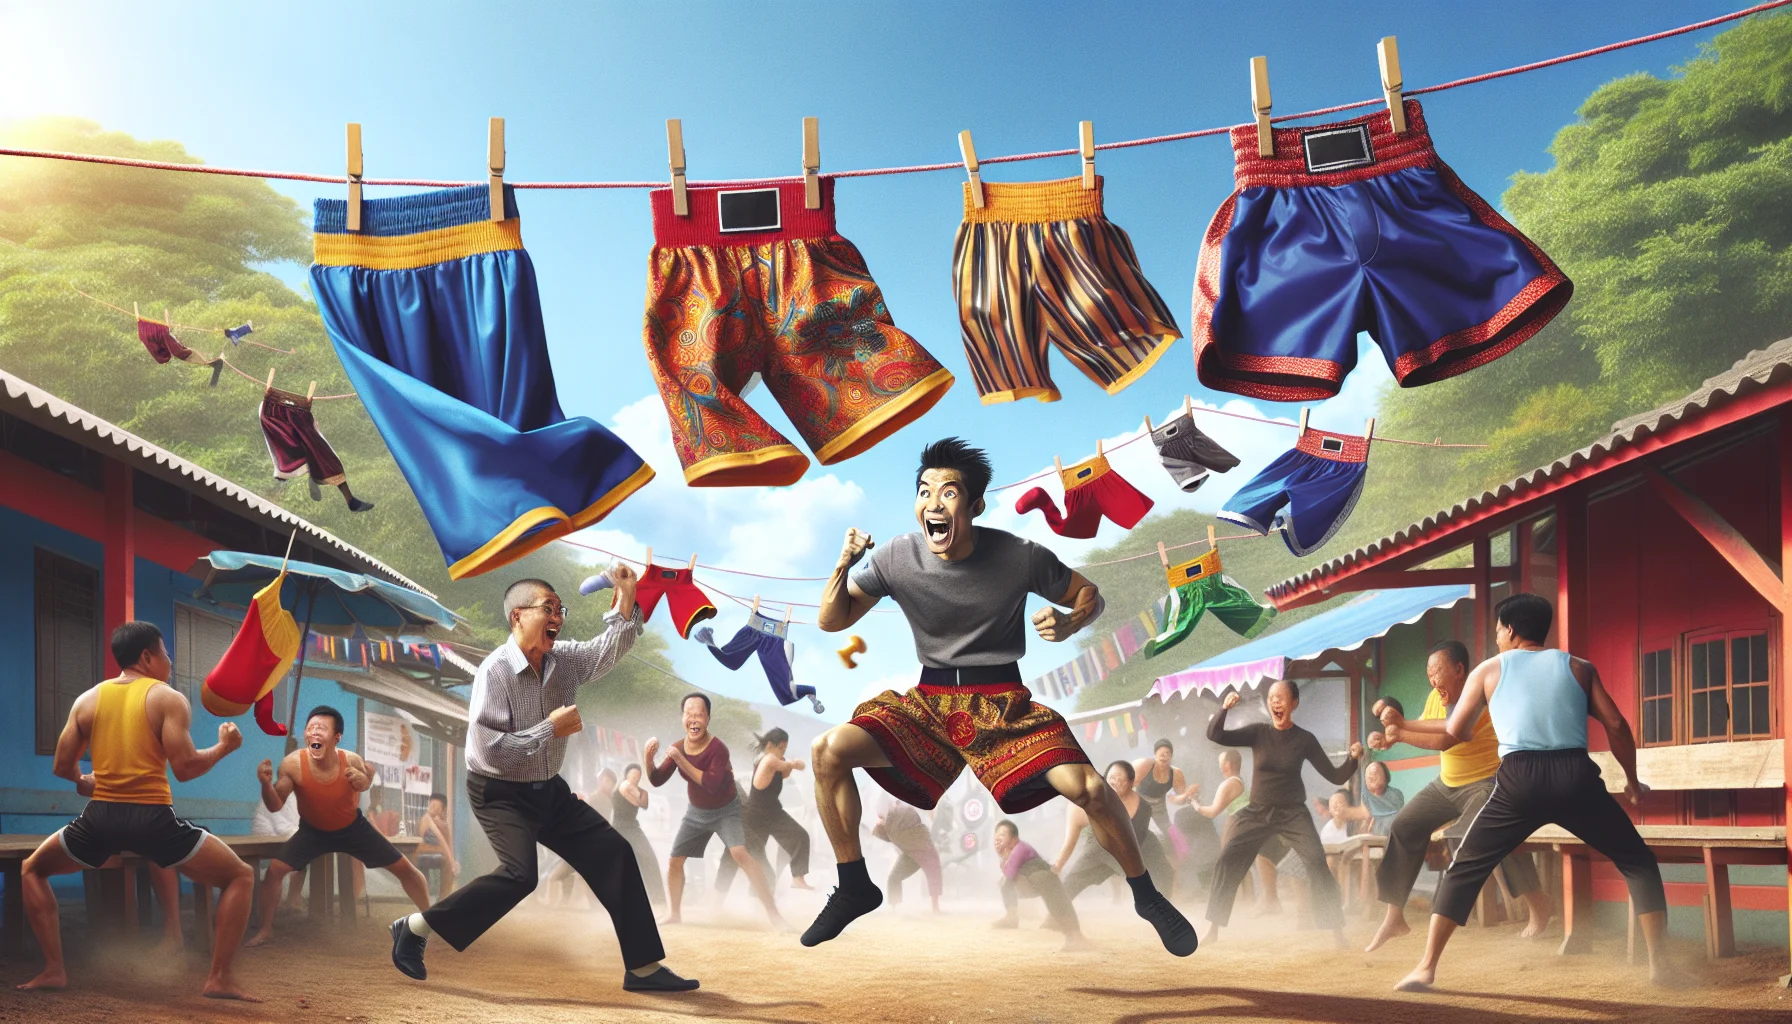 Create a high-resolution, hilarious scenario that encourages exercise. Visualize a pair of kickboxing shorts, vividly colored and boldly patterned, hanging on a clothesline. Suddenly, a strong wind swoops them up and they flutter into a busy outdoor gymnasium nearby. An unsuspecting Asian male gym-goer, in the middle of his workout routine, sees them coming towards him and leaps to catch them off the air, causing a commotion and lots of laughter around. His surprise and the amusement of others underline the fun that can be found in daily activities and even in the pursuit of fitness.